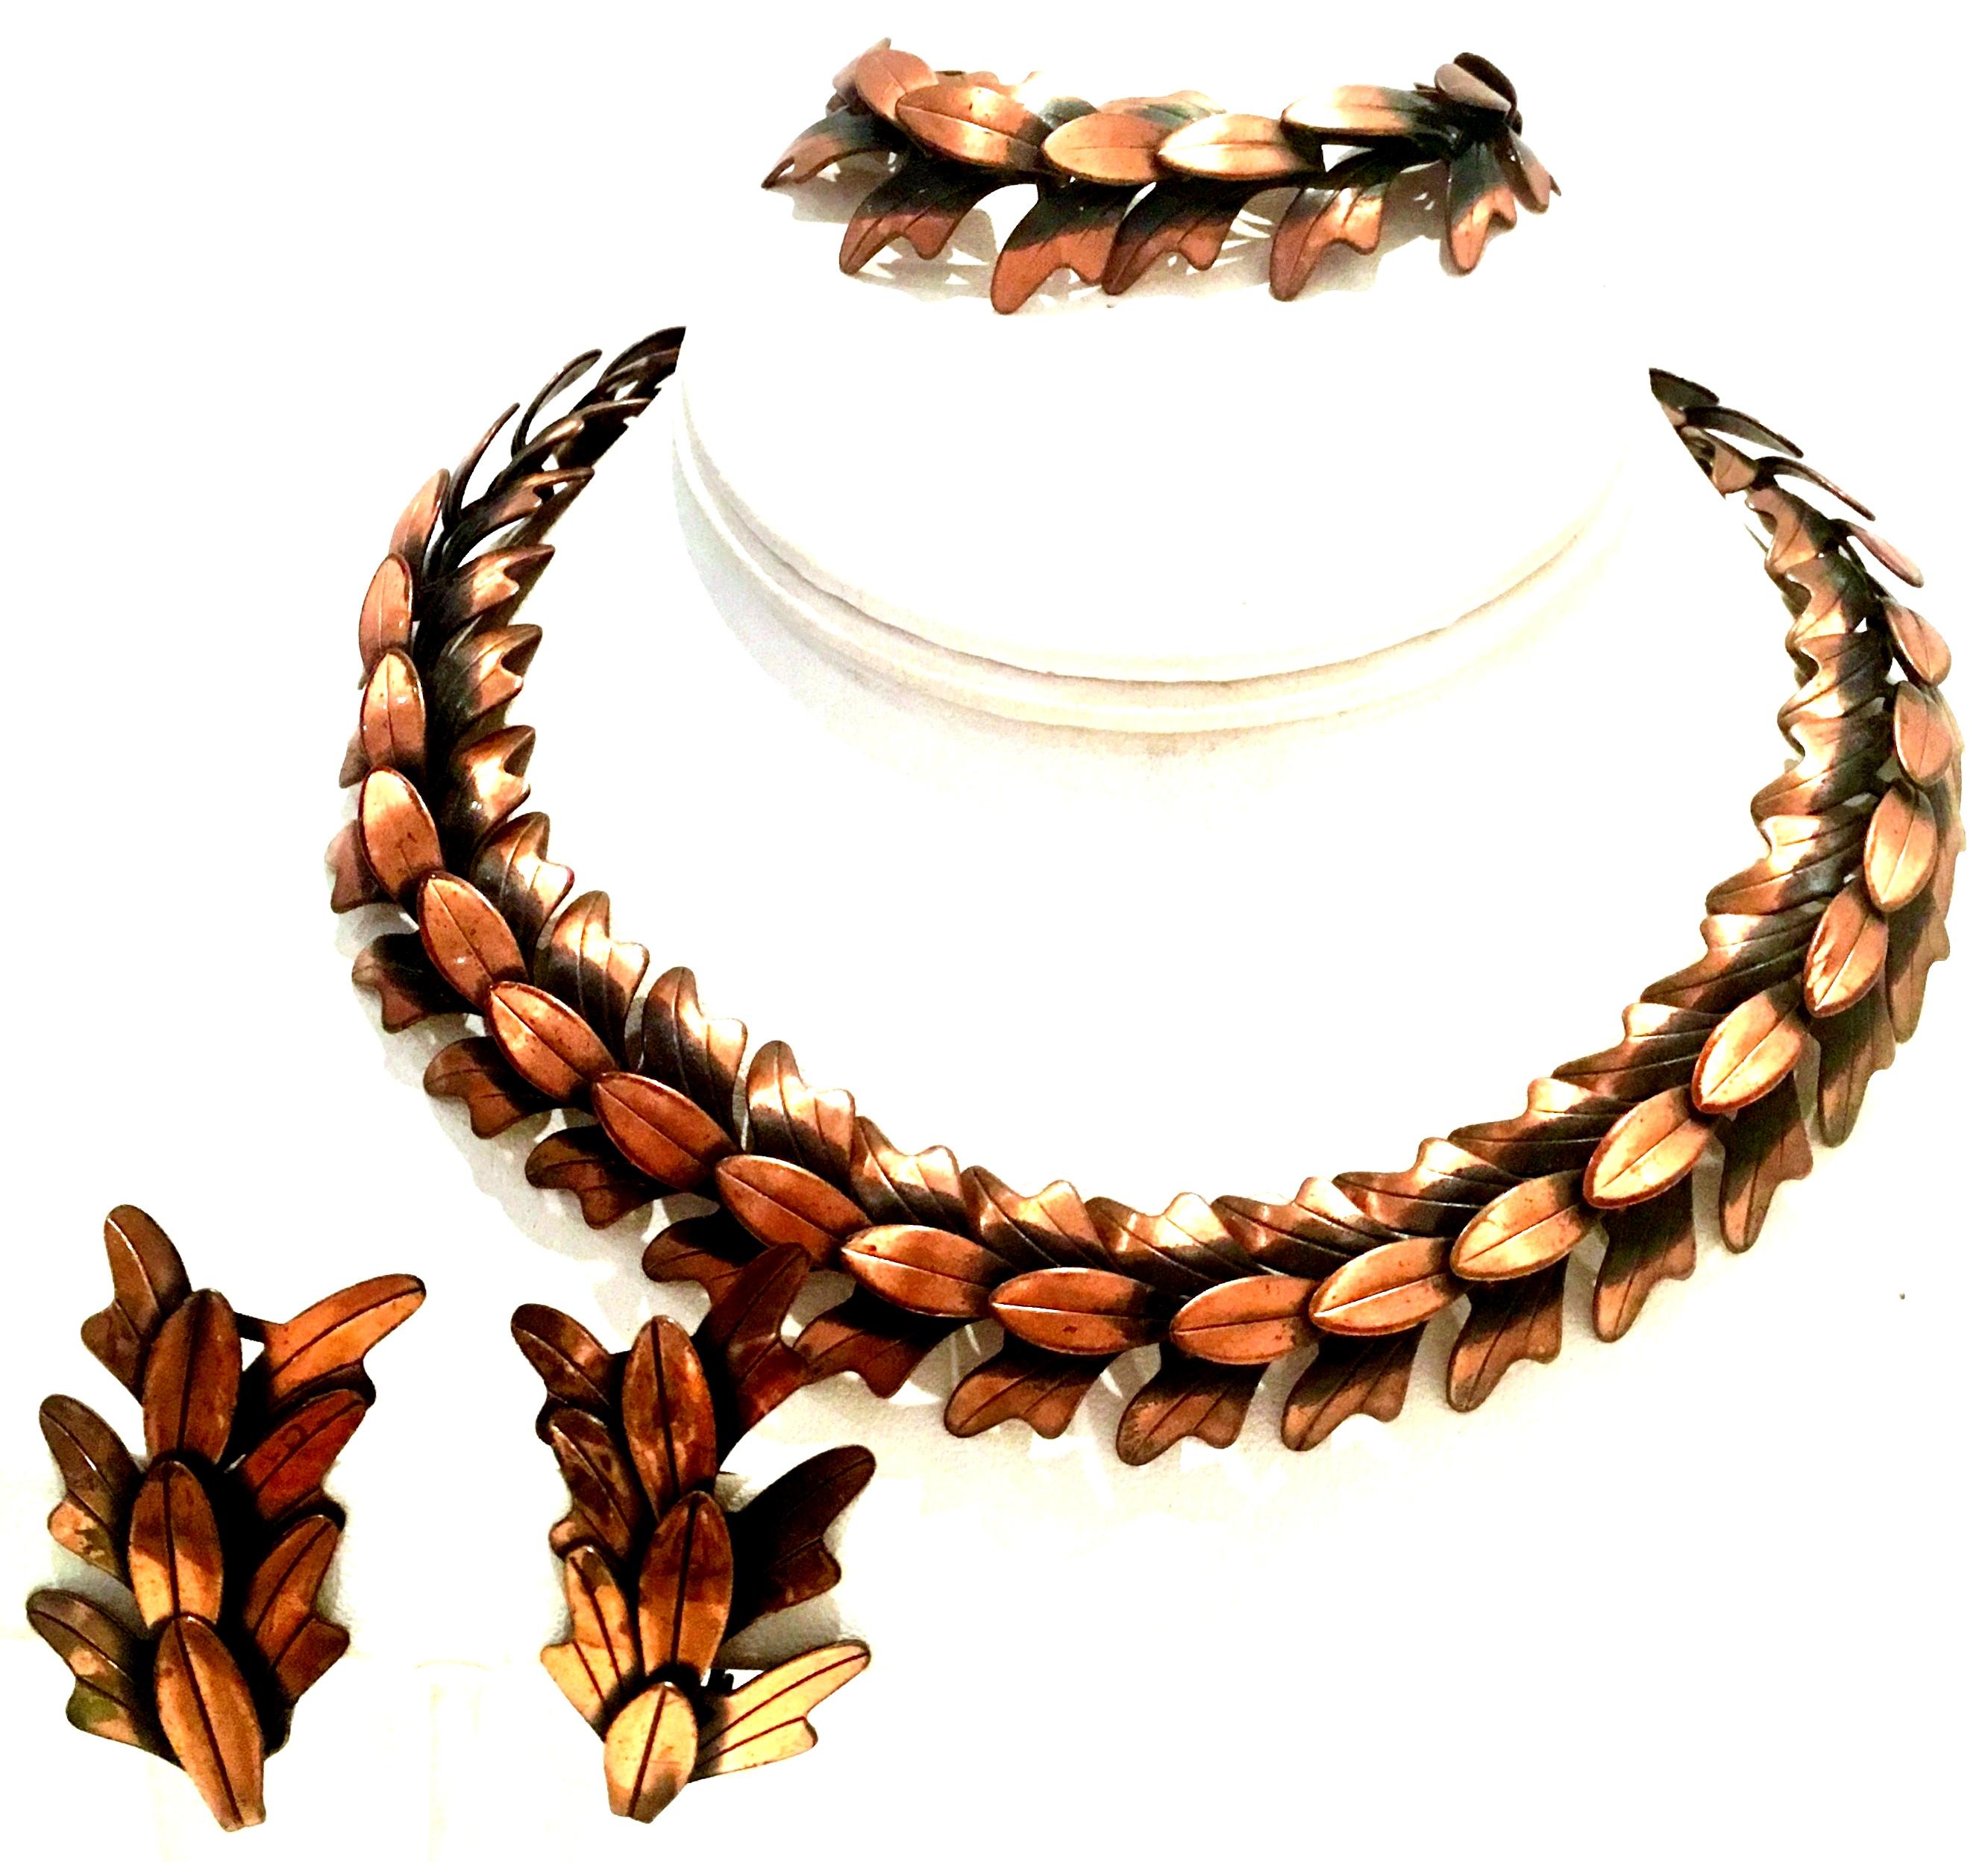 1950'S Modernist Copper Laurel Leaf Full Four Piece Demi Parure Necklace, Bracelet And Pair Of Earrings By, Rebajes. This coveted four piece set features a burnished copper dimensional abstract laurel leaf link choker style necklace, complimentary